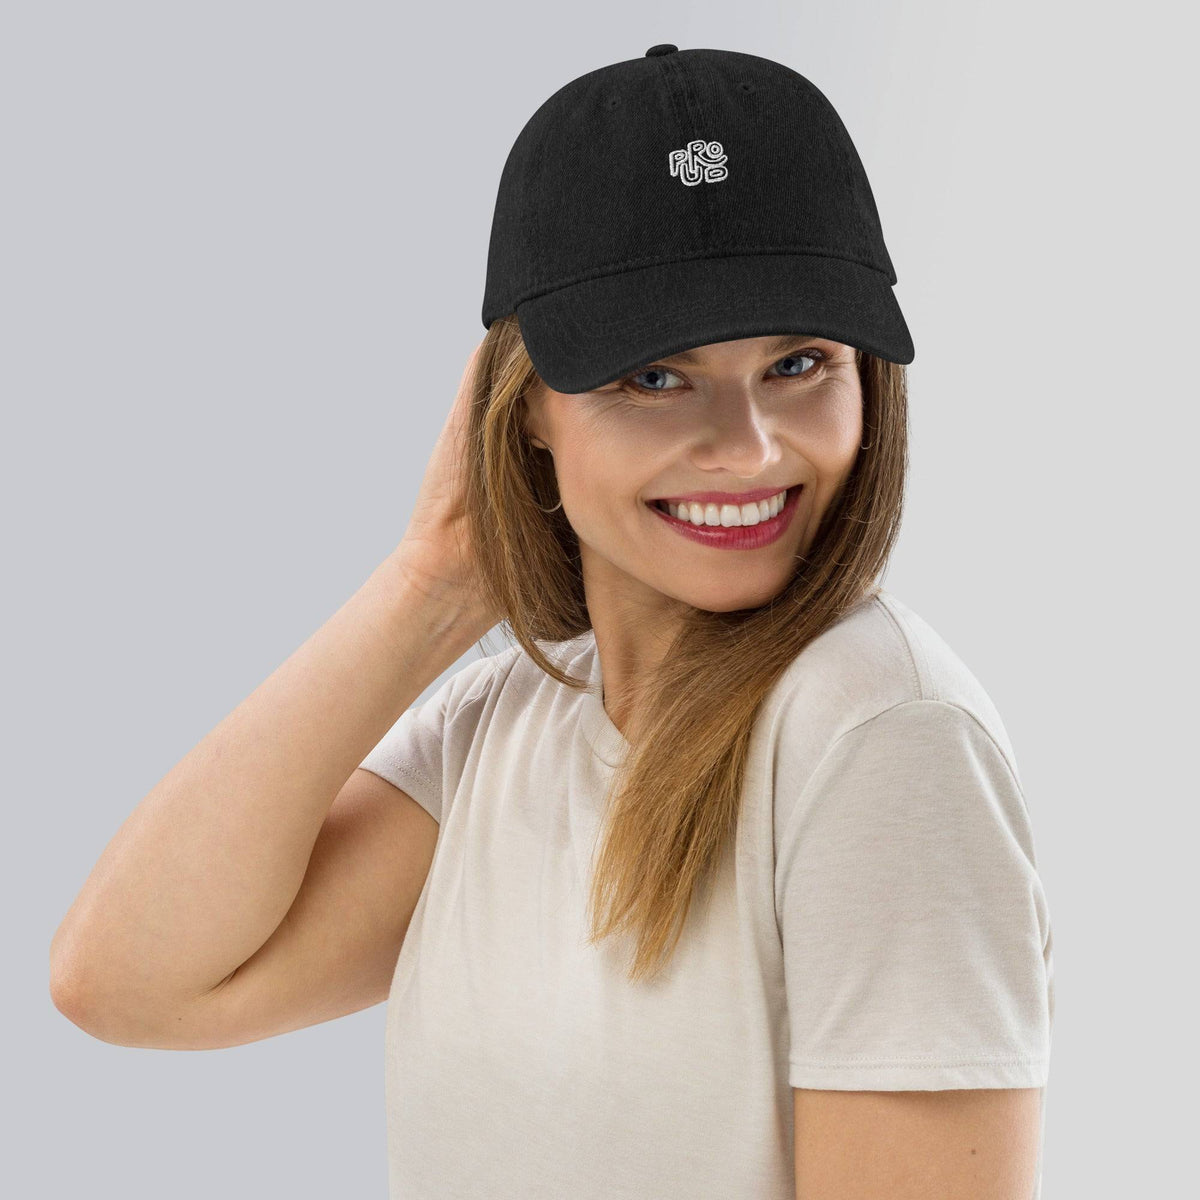 Denim Caps - Revive Wear     Ladies&#39; Denim Cap. Timeless as your favorite pair of jeans. This pigment-dyed denim cap with an adjustable strap lets you find your perfect fit. Available now.